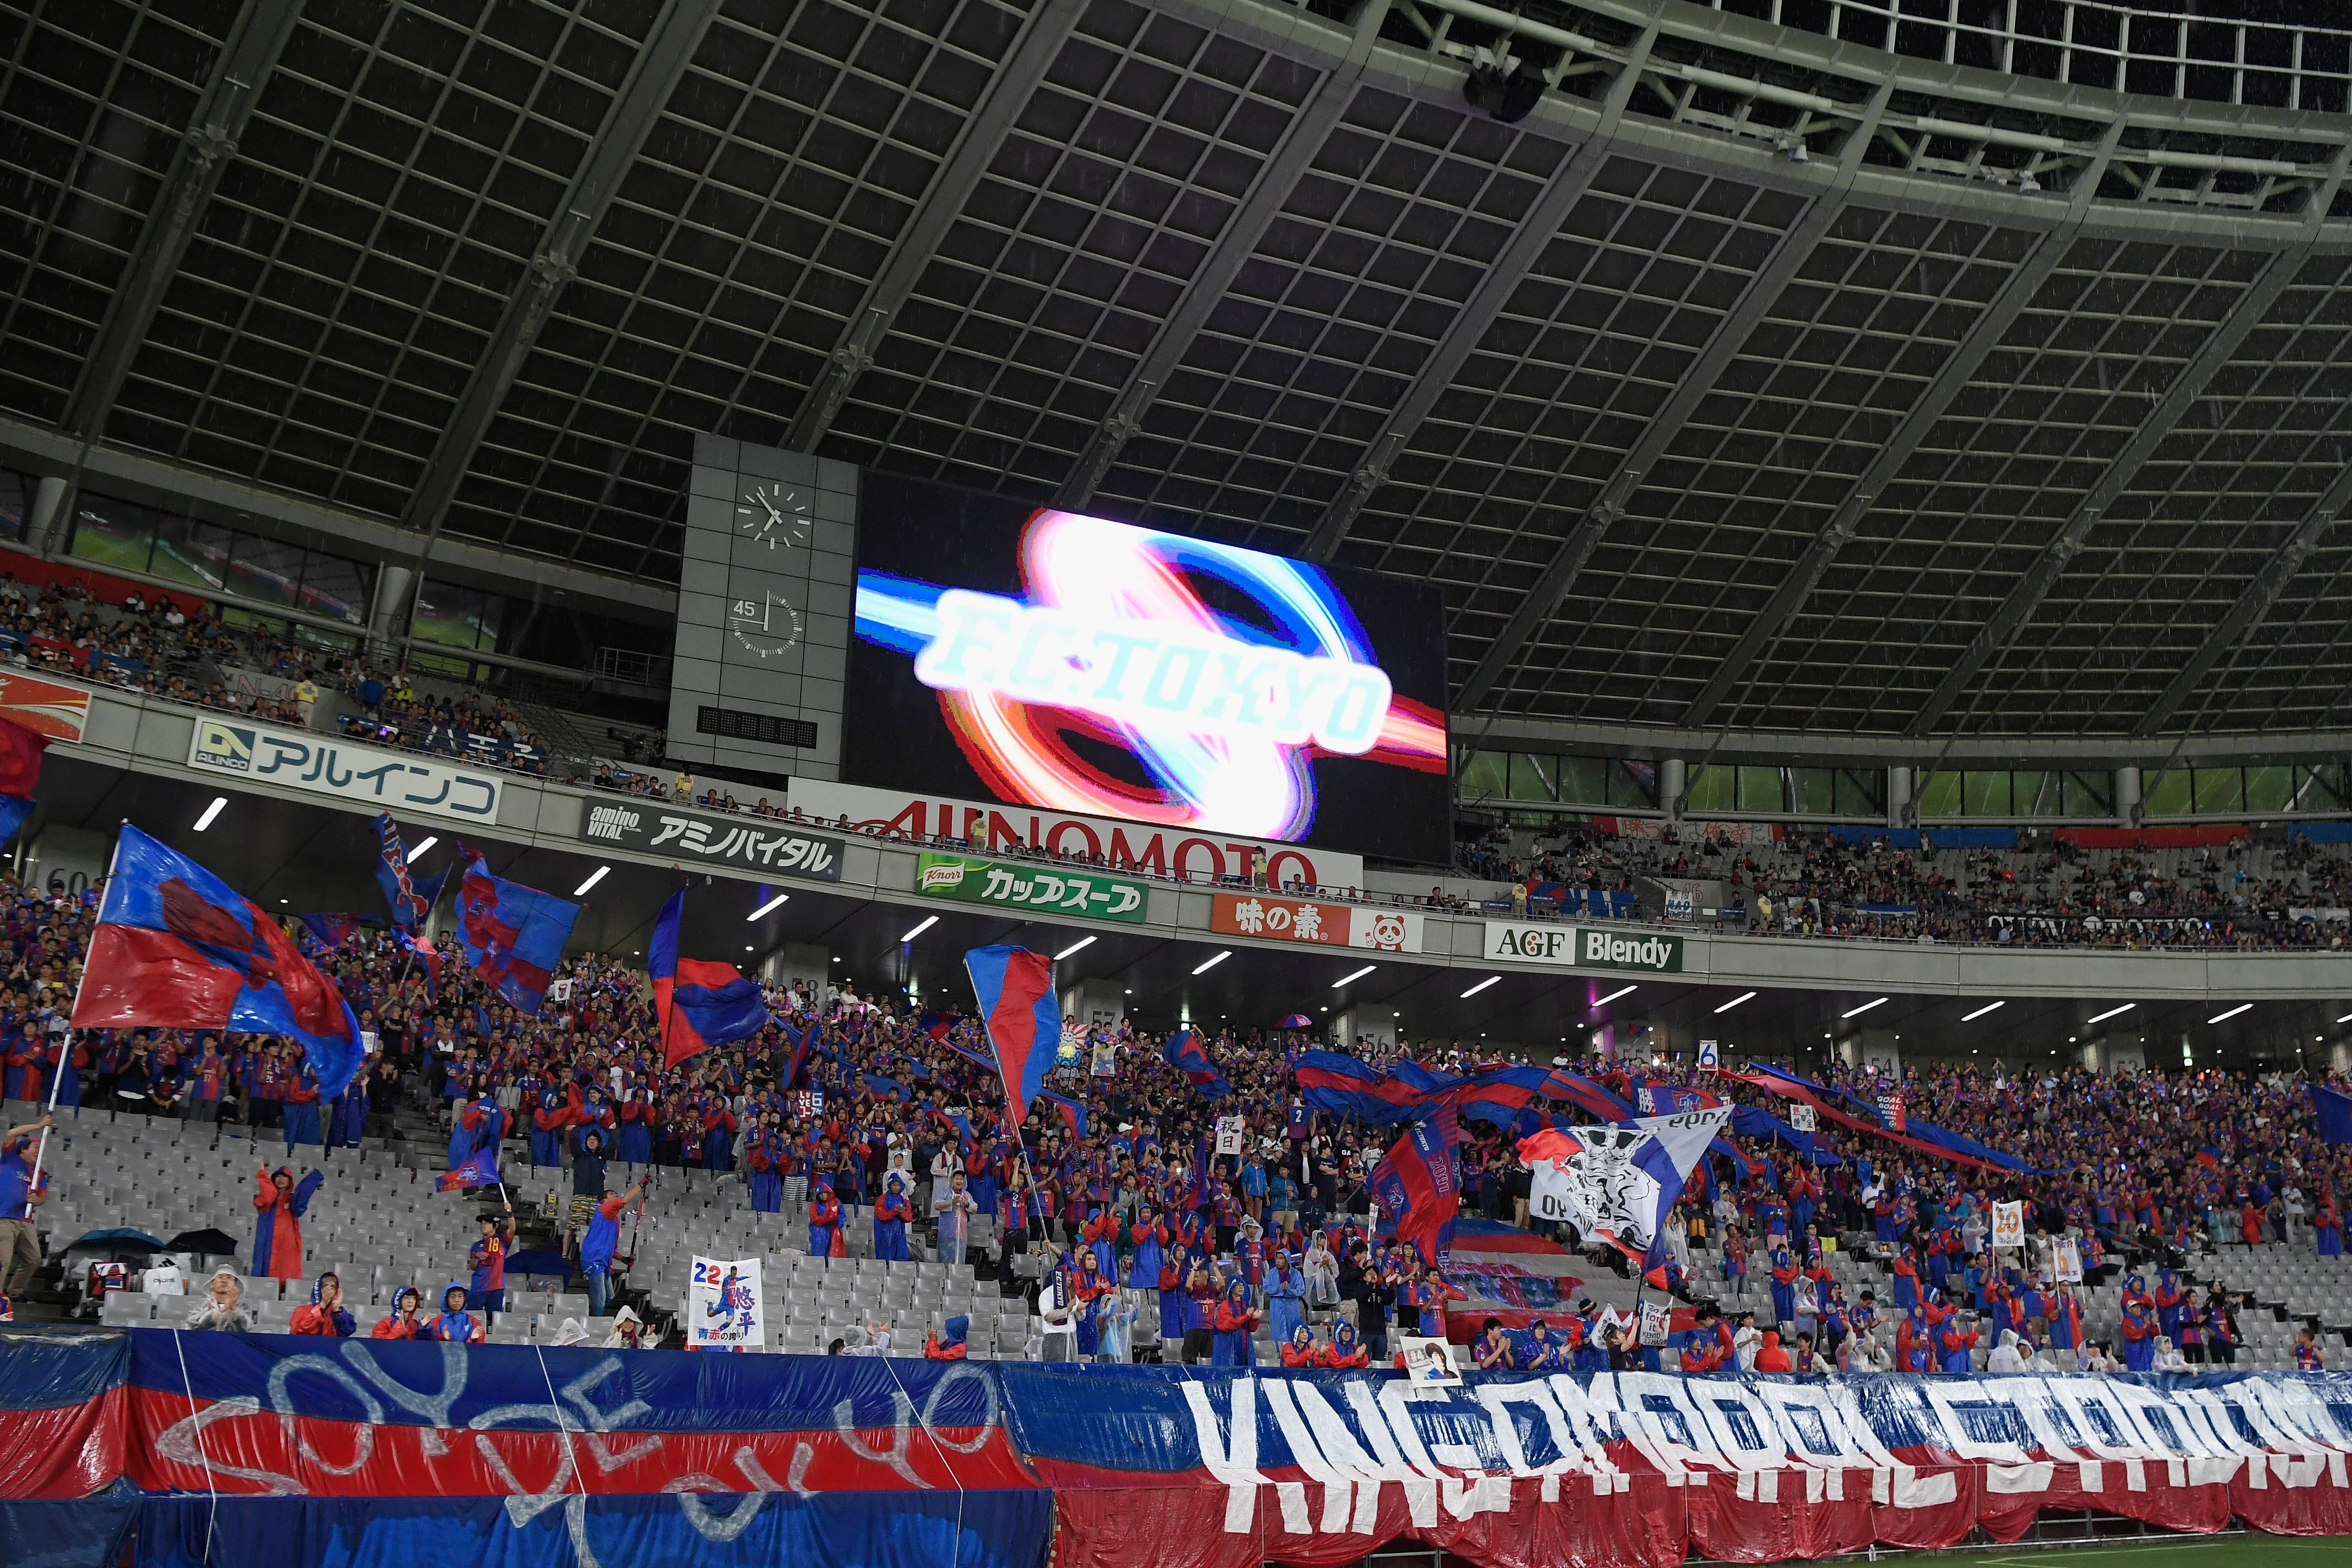 FC Tokyo, tech giants Mixi plan new stadium in central Tokyo – Report